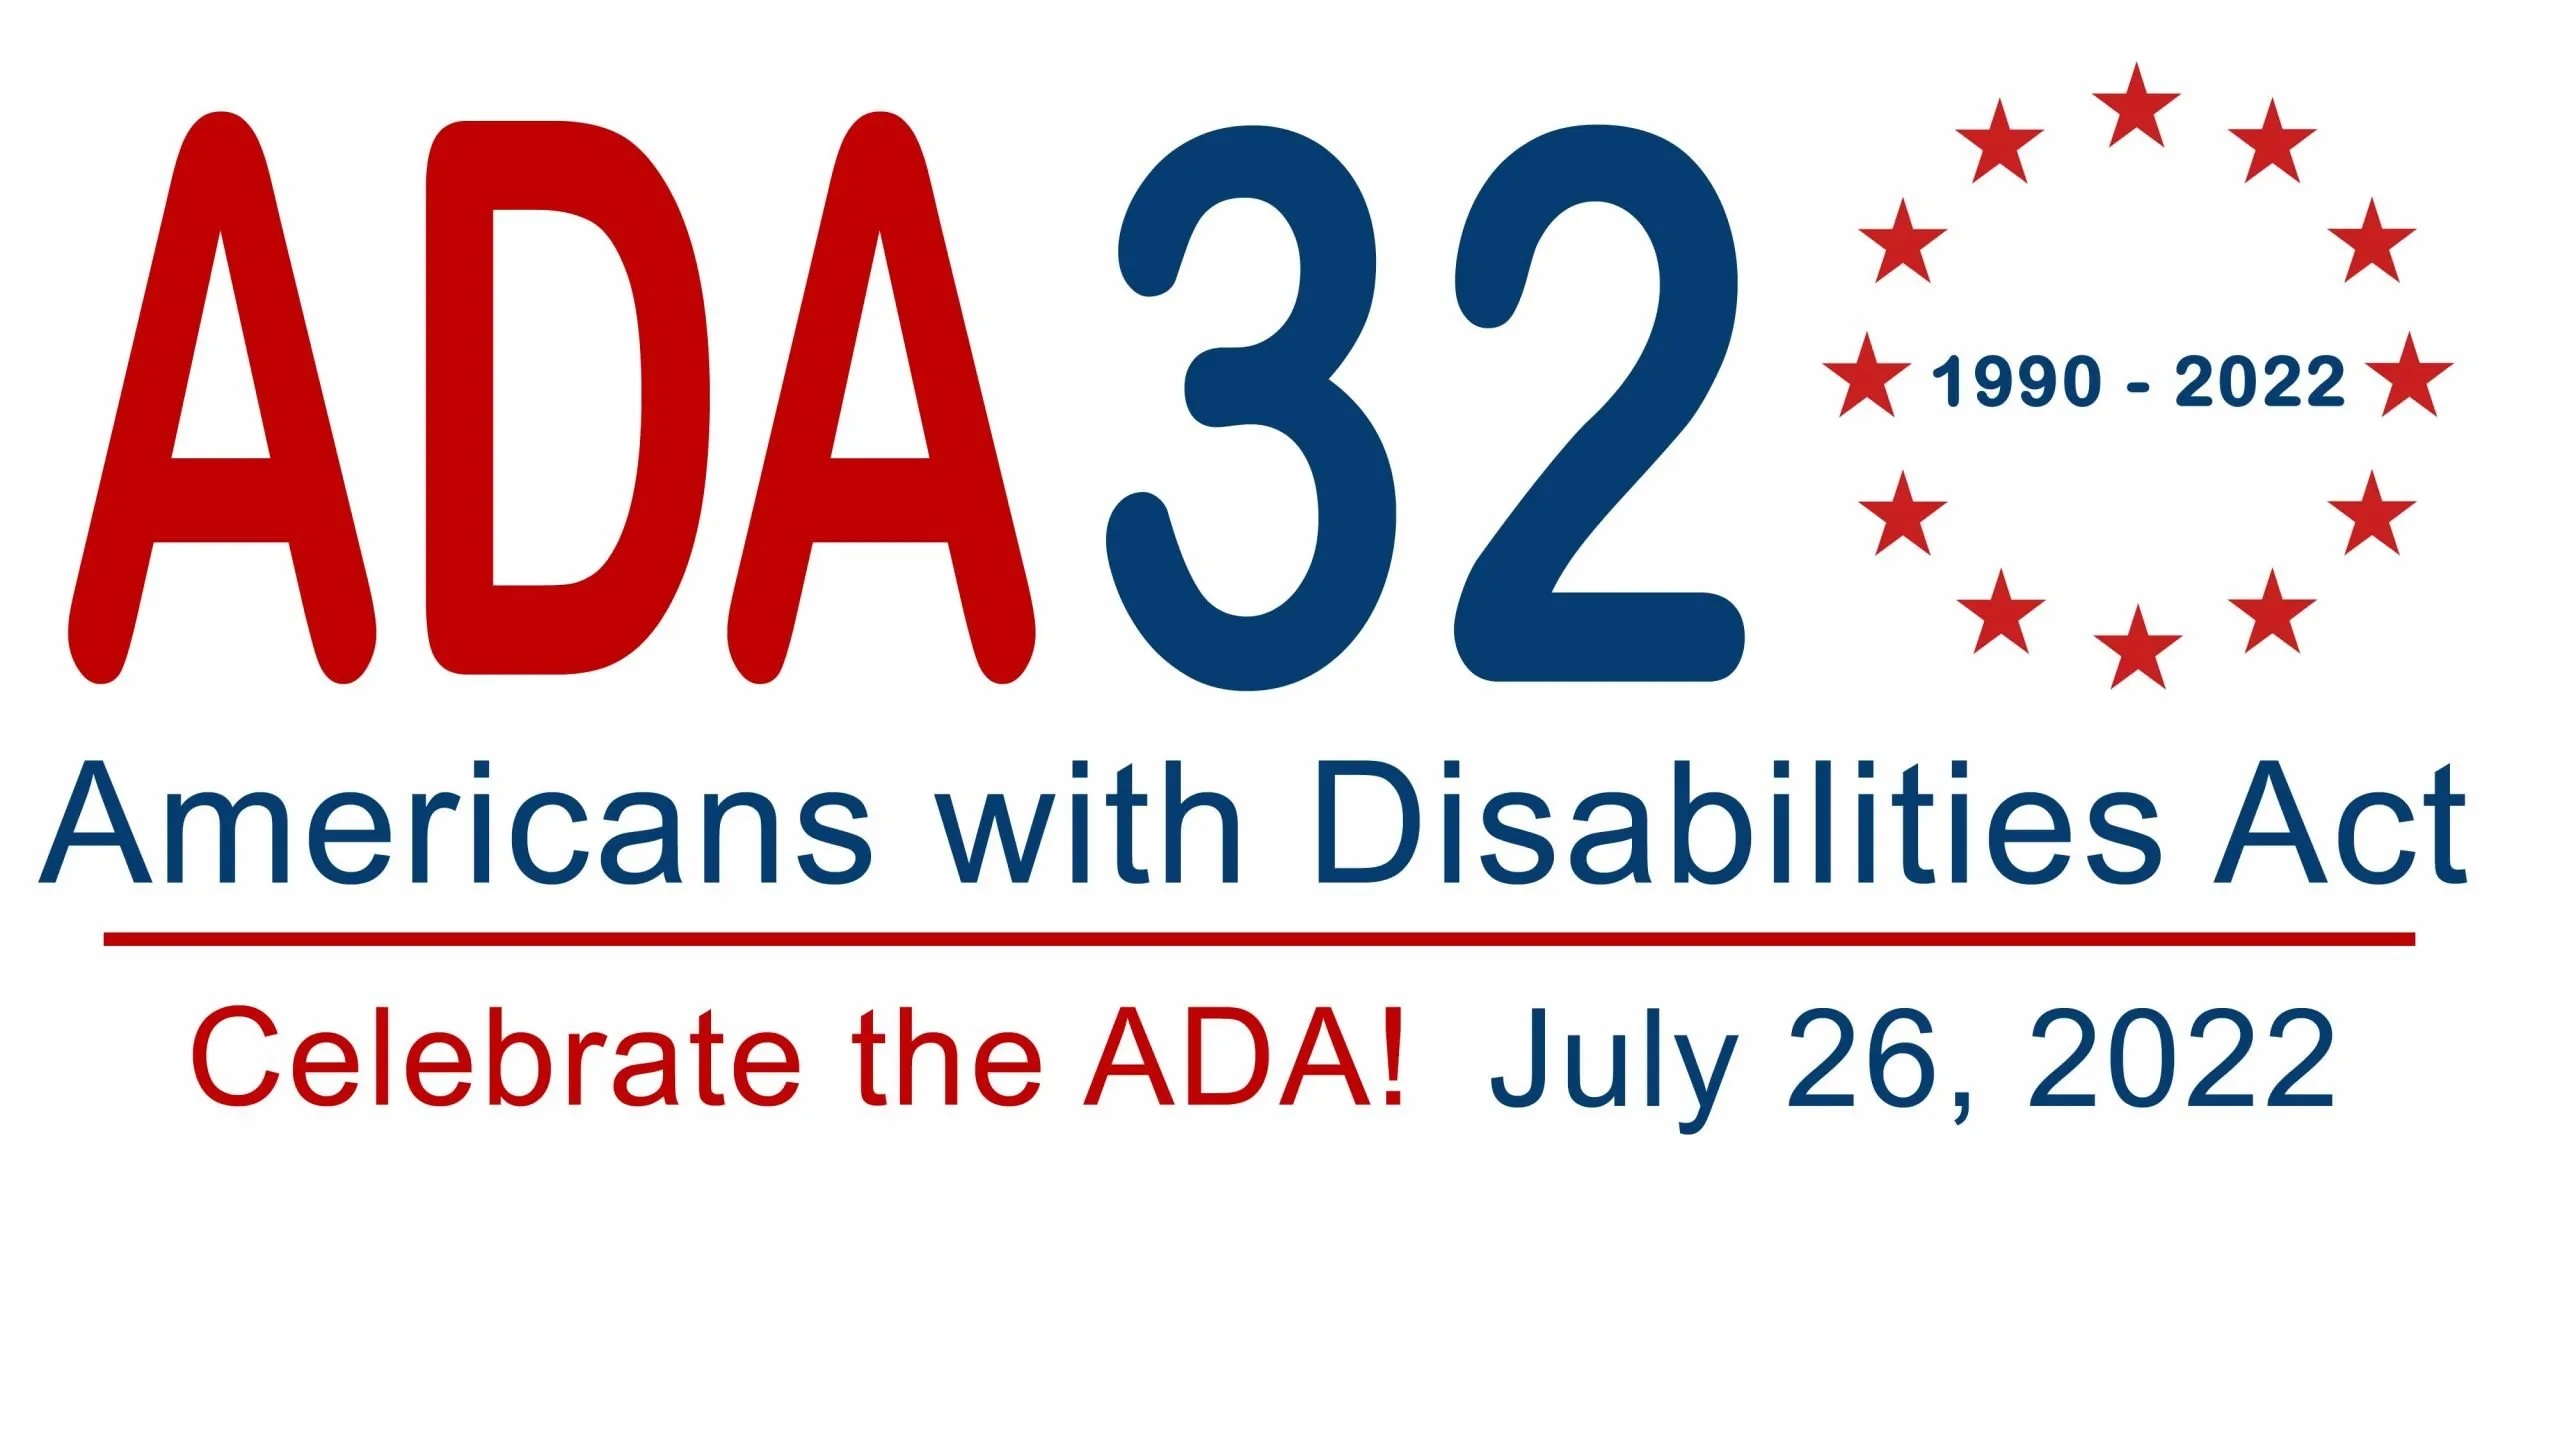 ADA32 celebrate 32 years of the Americans with Disabilities Act